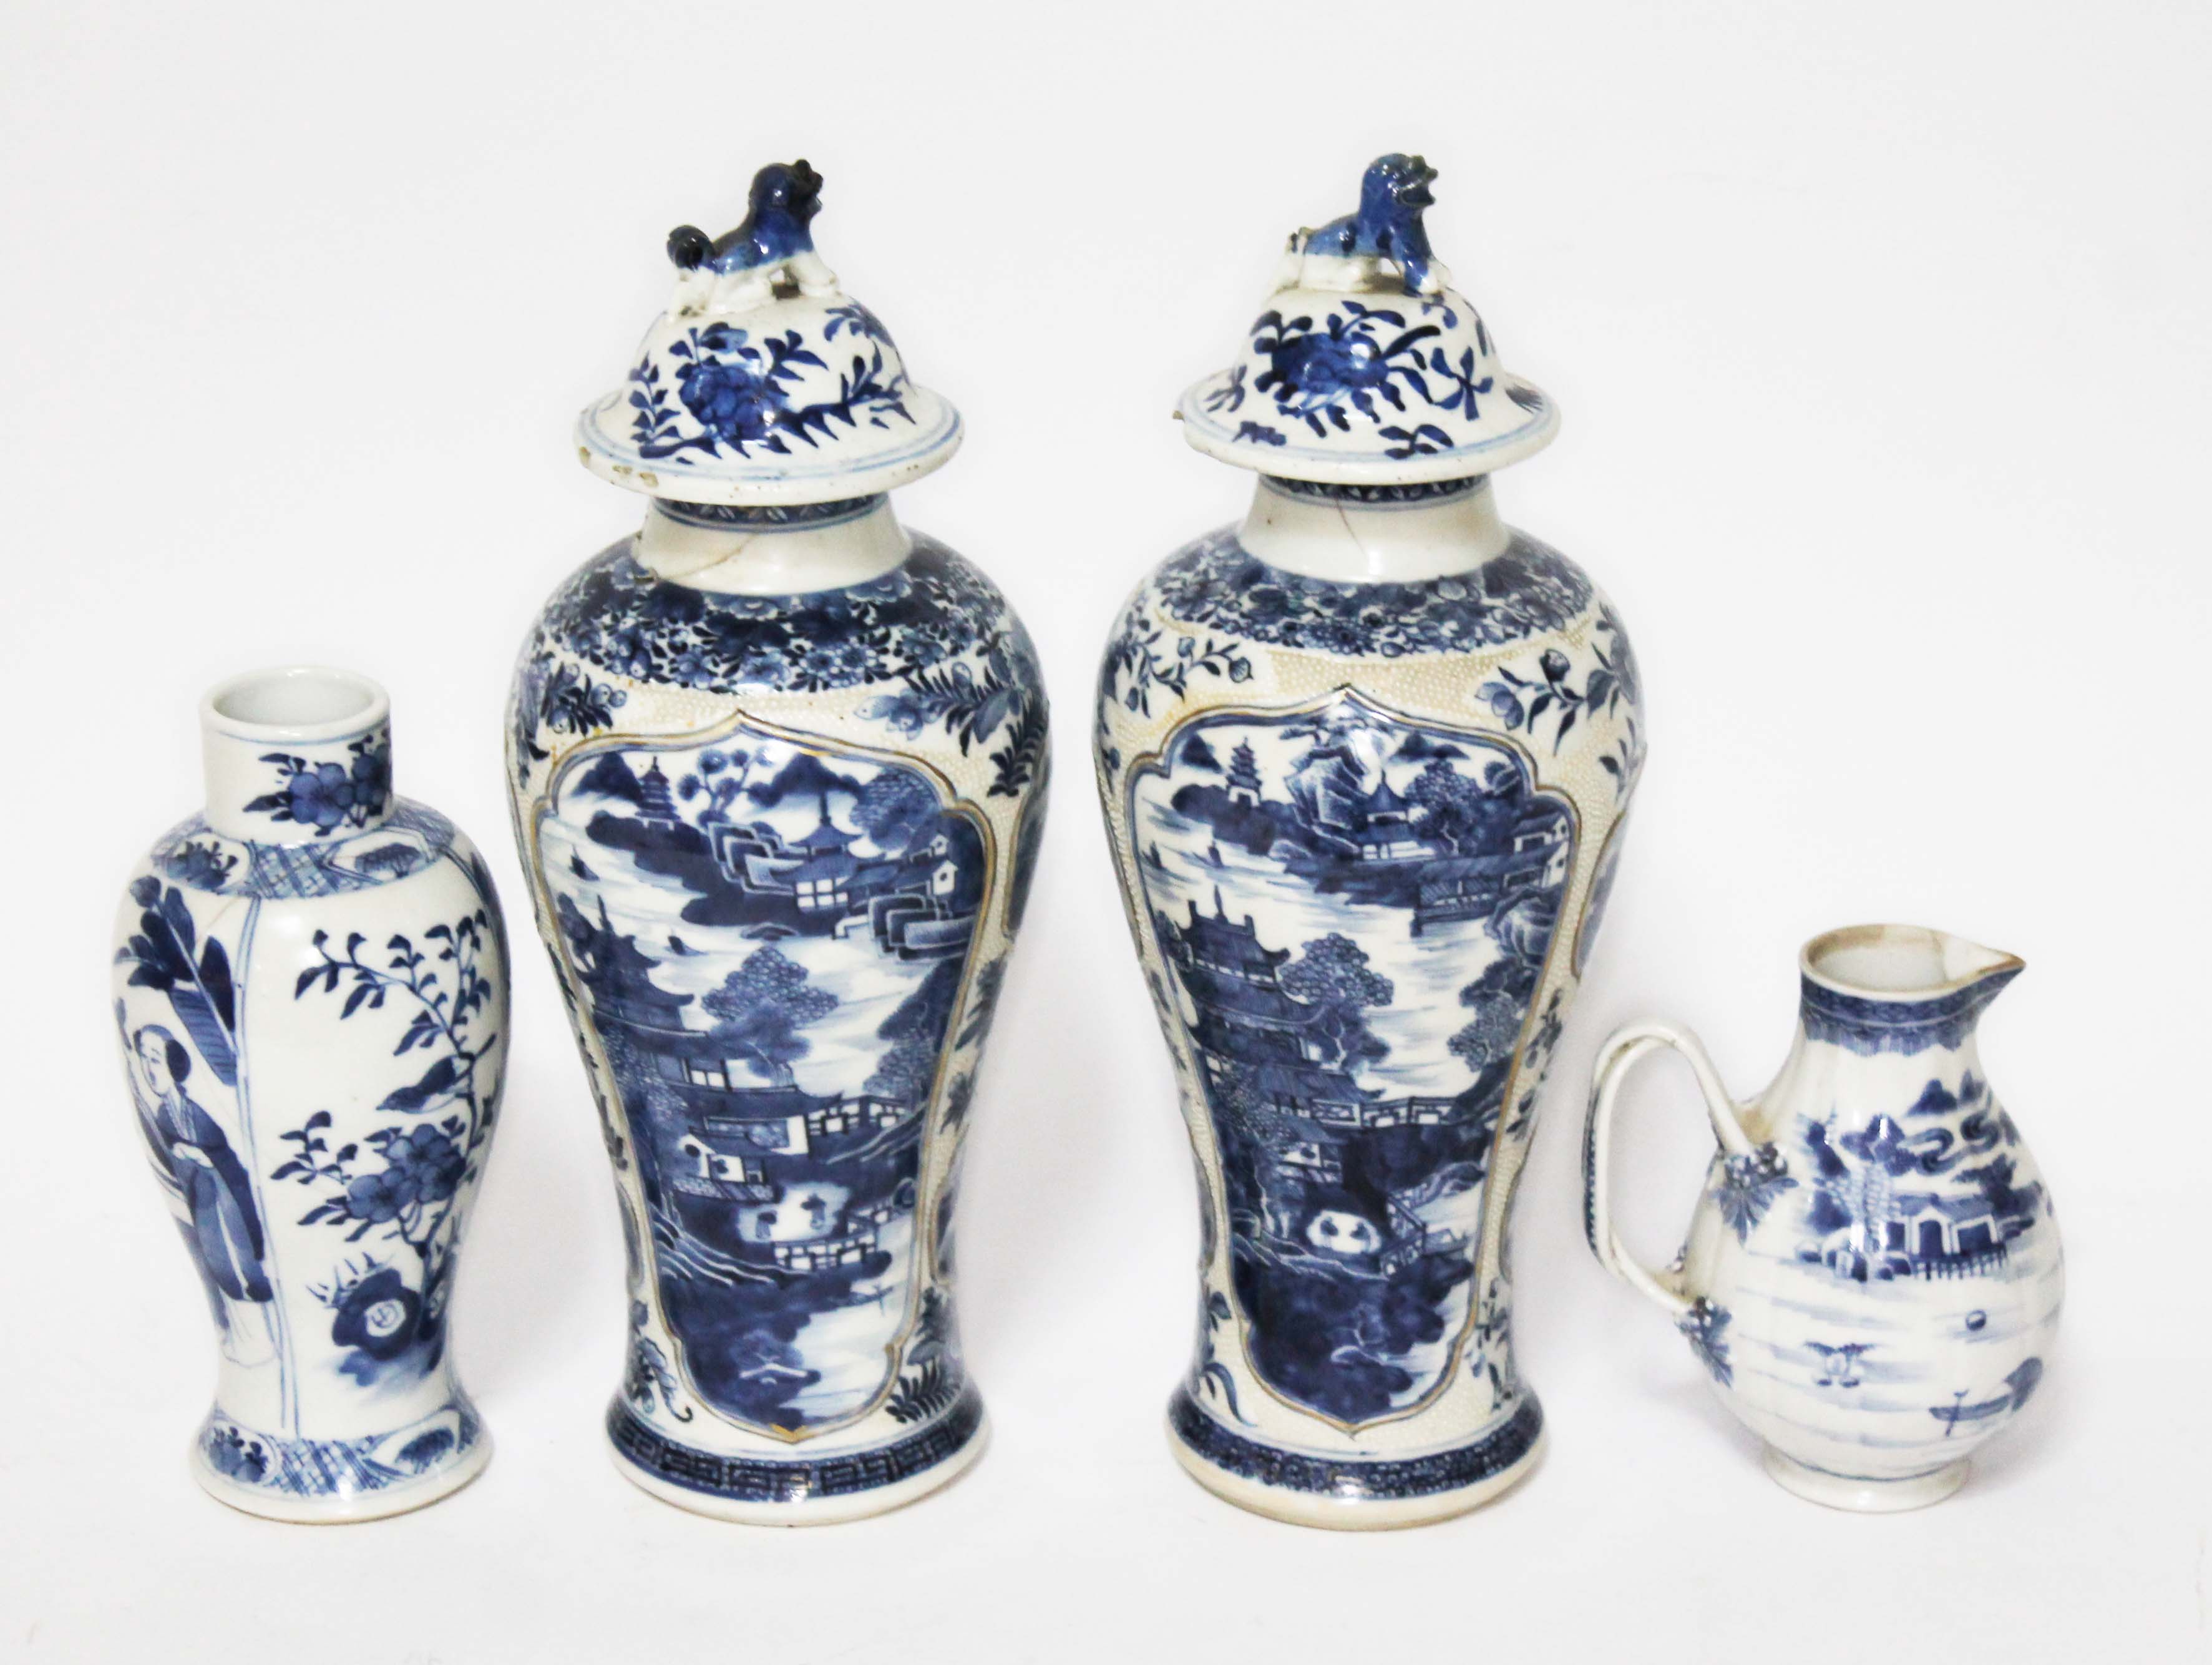 Assorted Chinese porcelain comprising a pair of baluster vases with covers, an export jug and